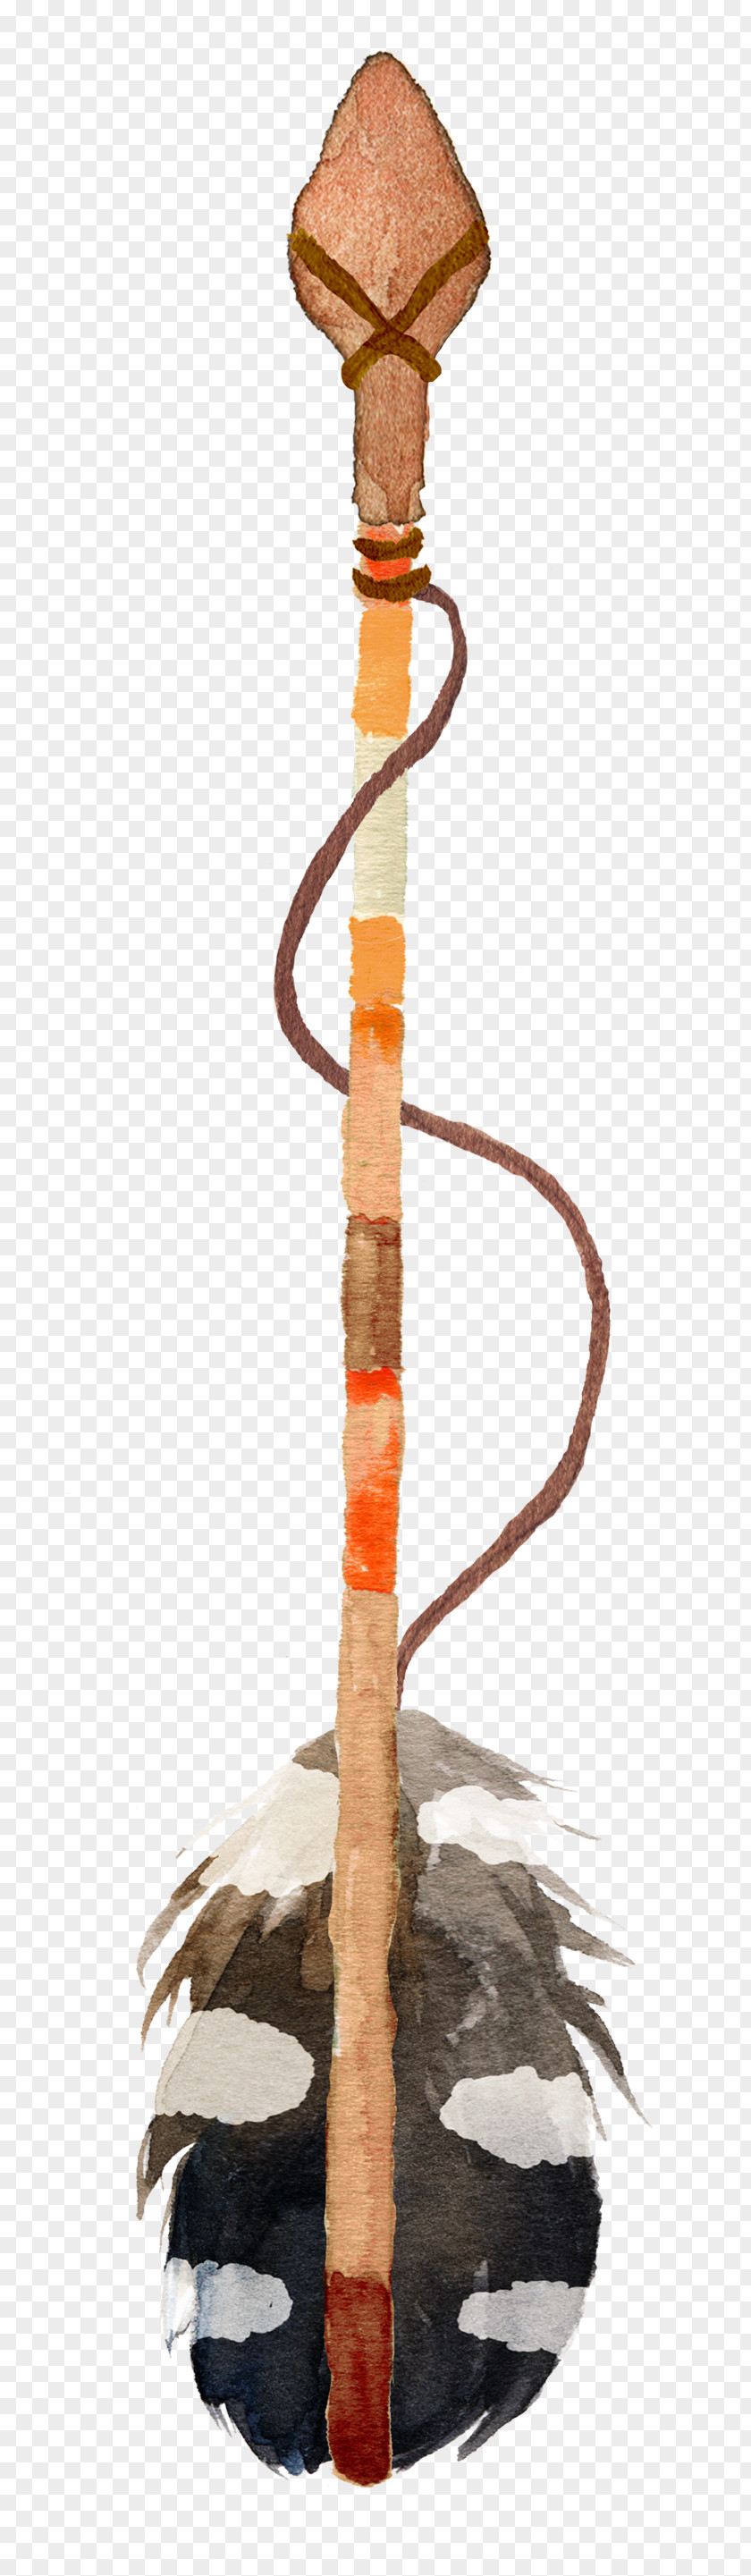 Watercolor Painting Stone Spear Javelin Arrow PNG